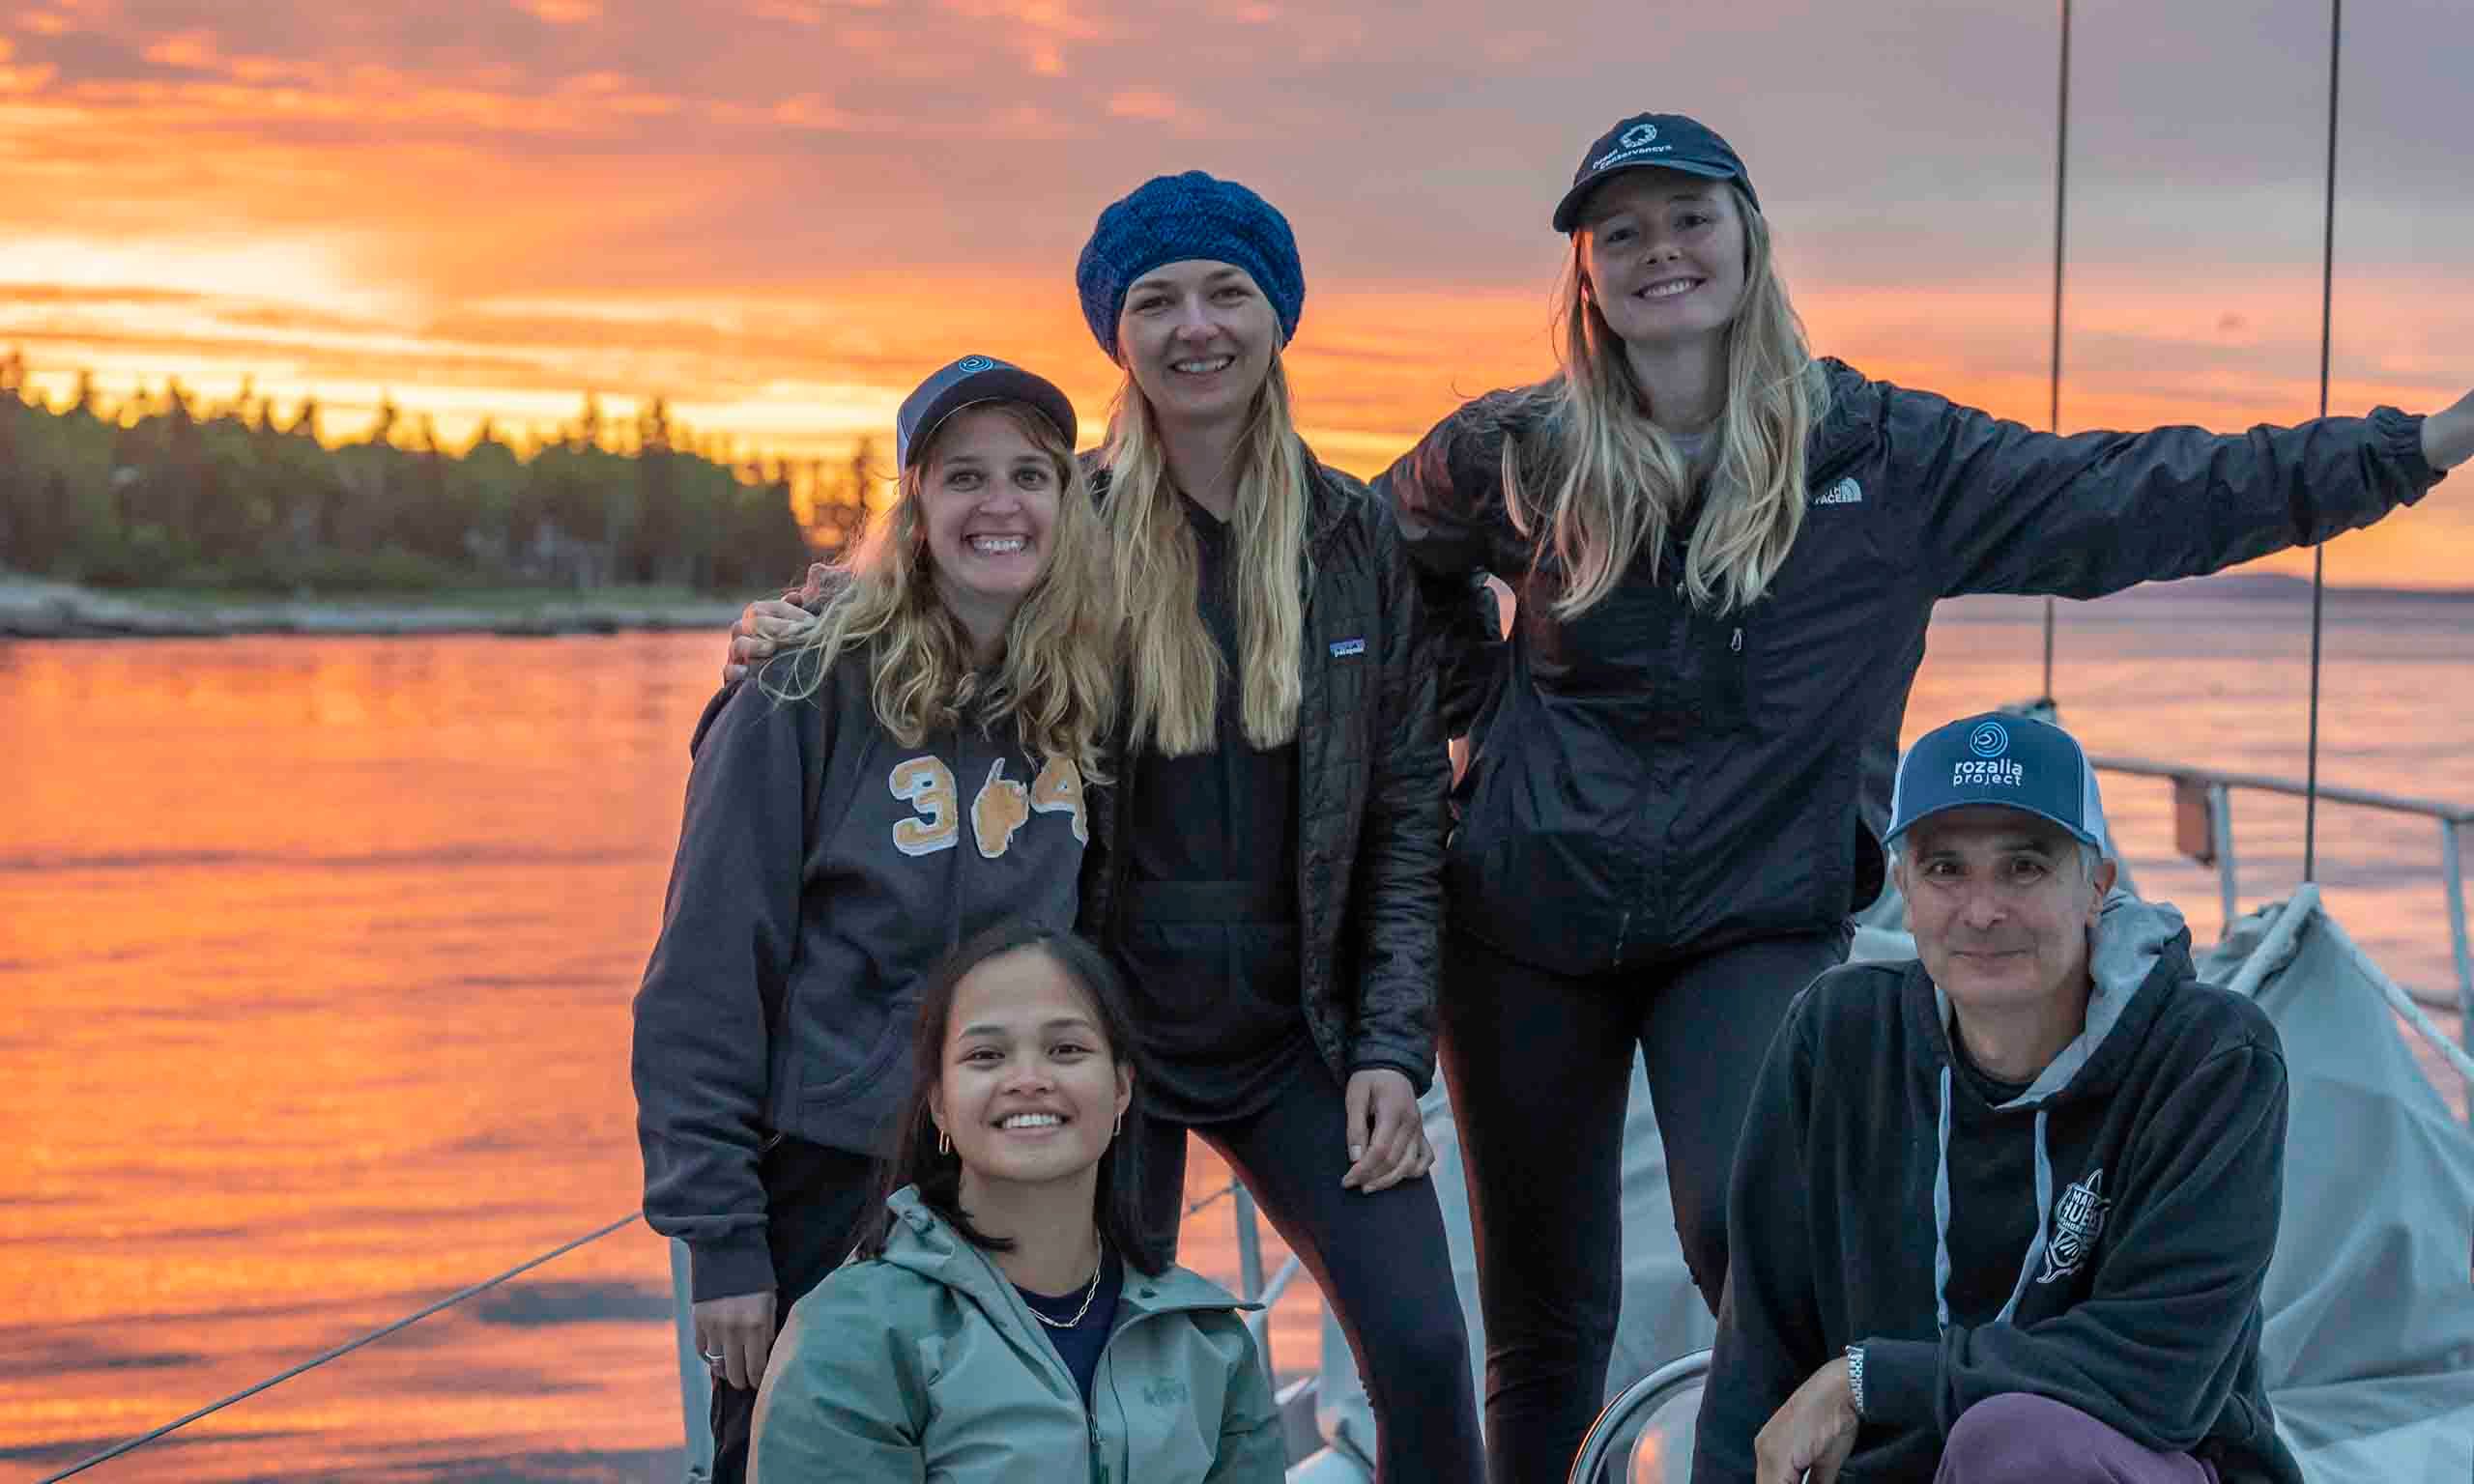 A group of Ocean Conservancy staff smiling aboard the American Promise sailboat with their backs to an incredible orange and purple sunset.